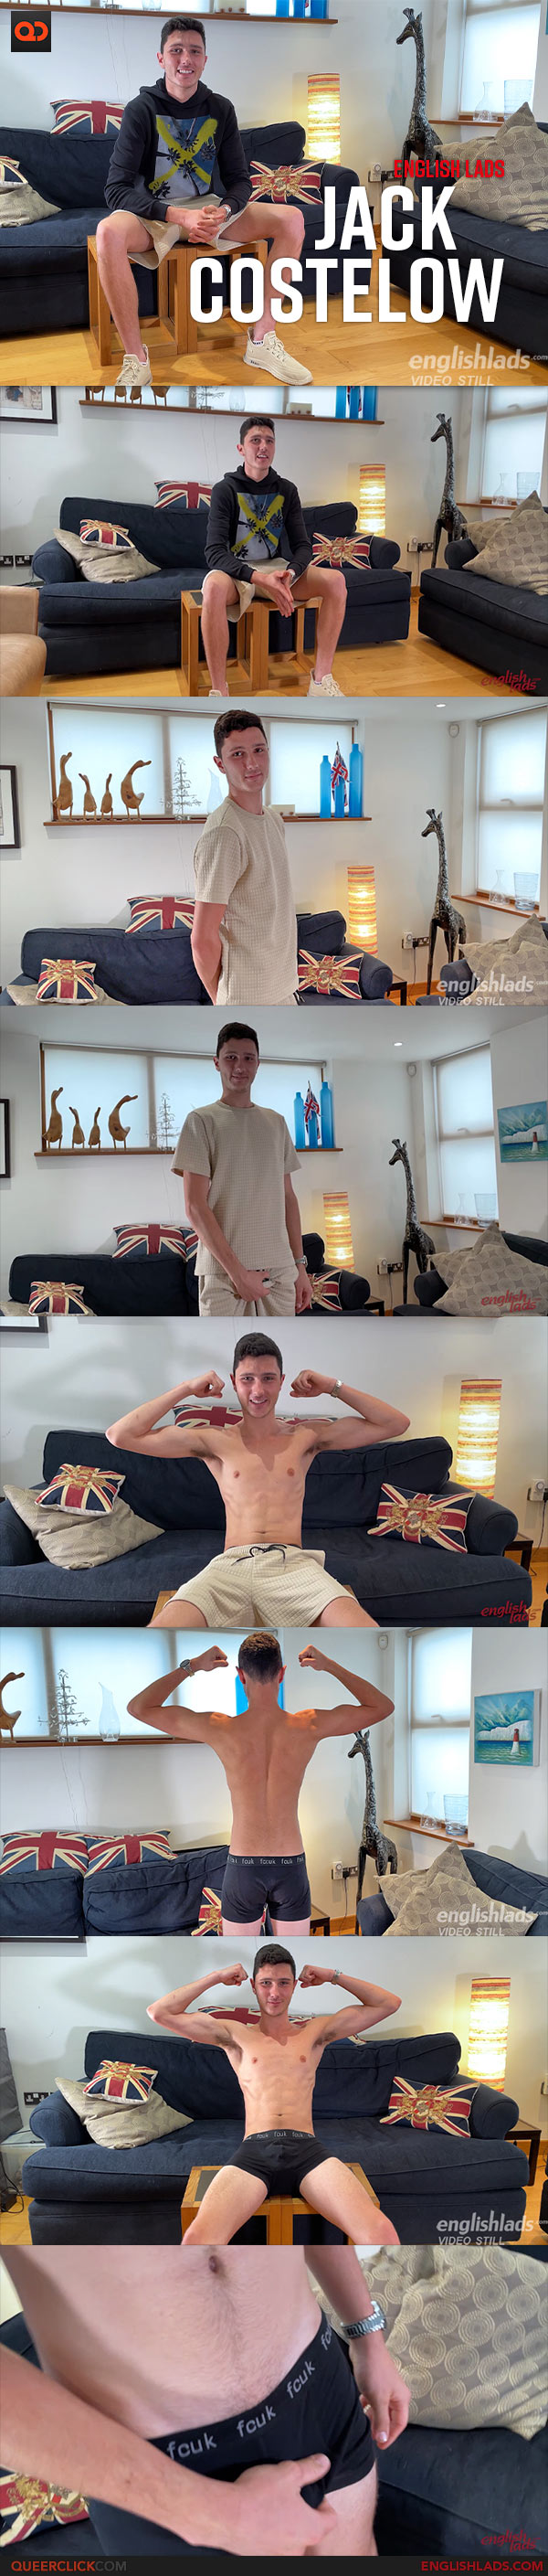 English Lads: Jack Costelow - Young, Straight, and Tall Teen Shows off His Lean Body and Wanks His Big Uncut Cock